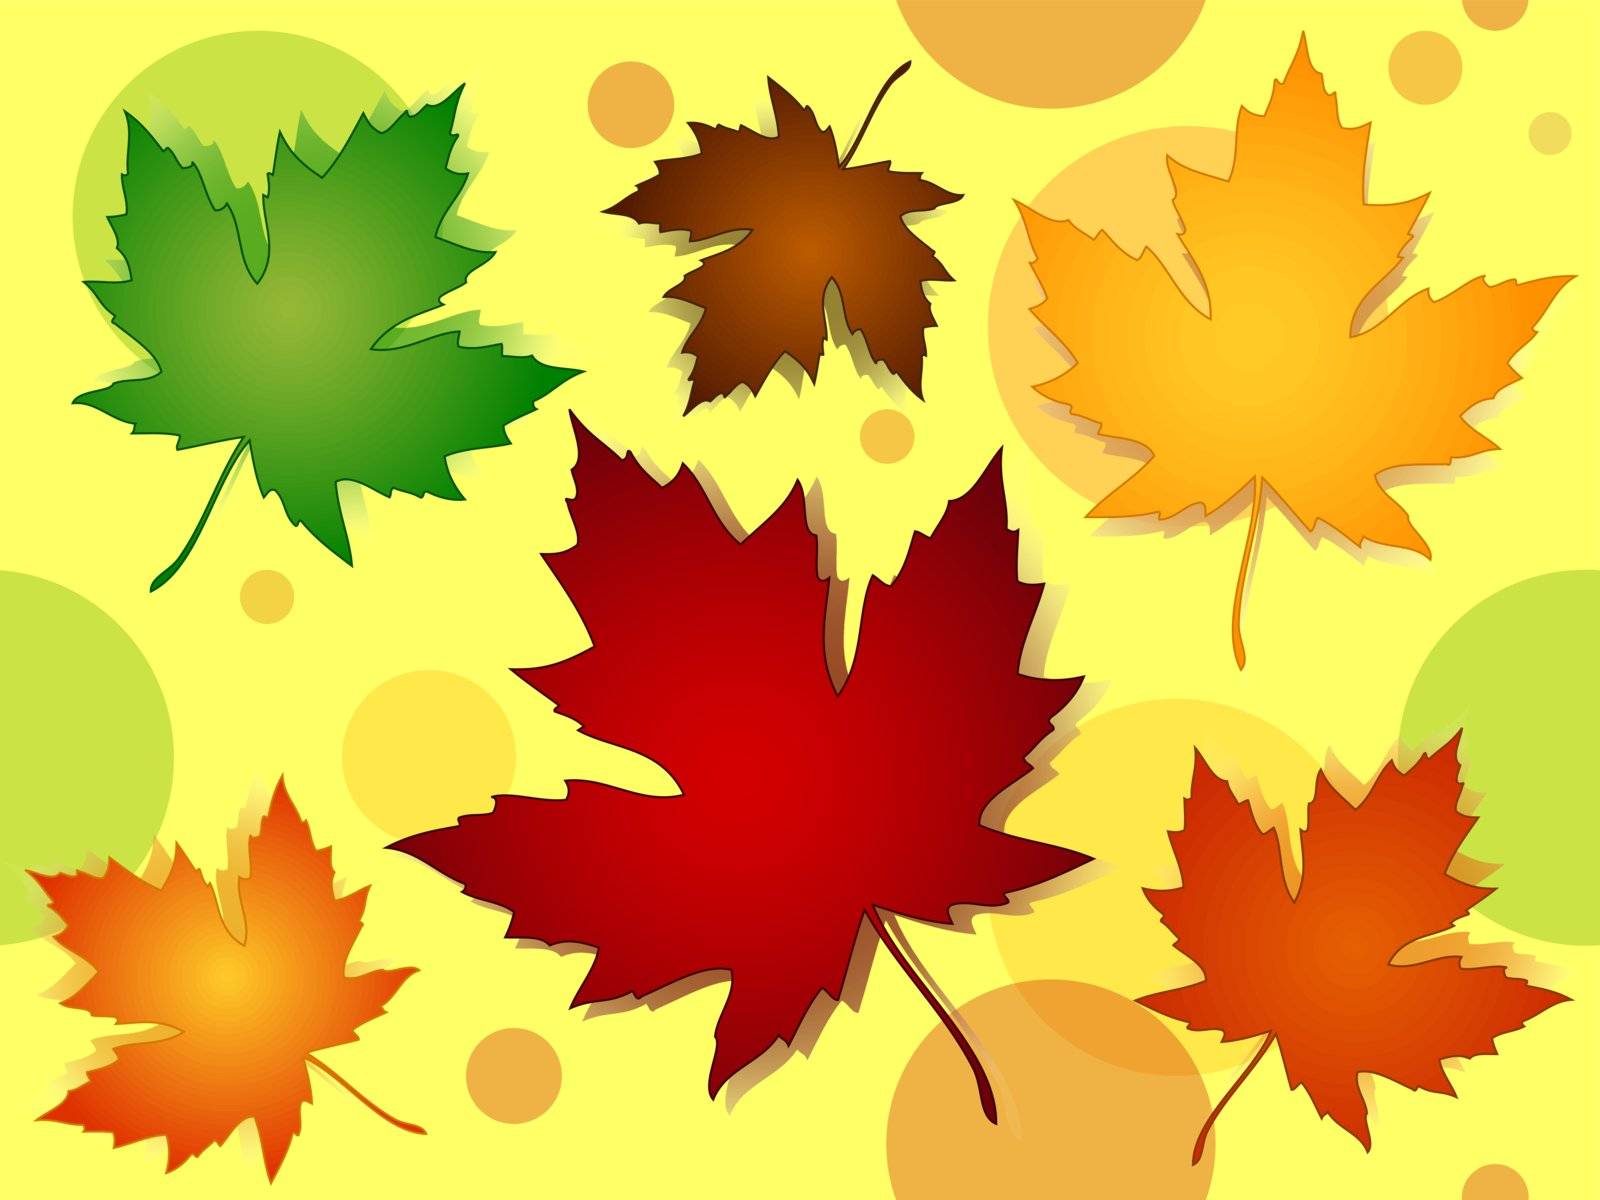 Seamless pattern of beautiful maple leaves in seasonal fall or autumn colors over yellow background with transparent dots or circles.